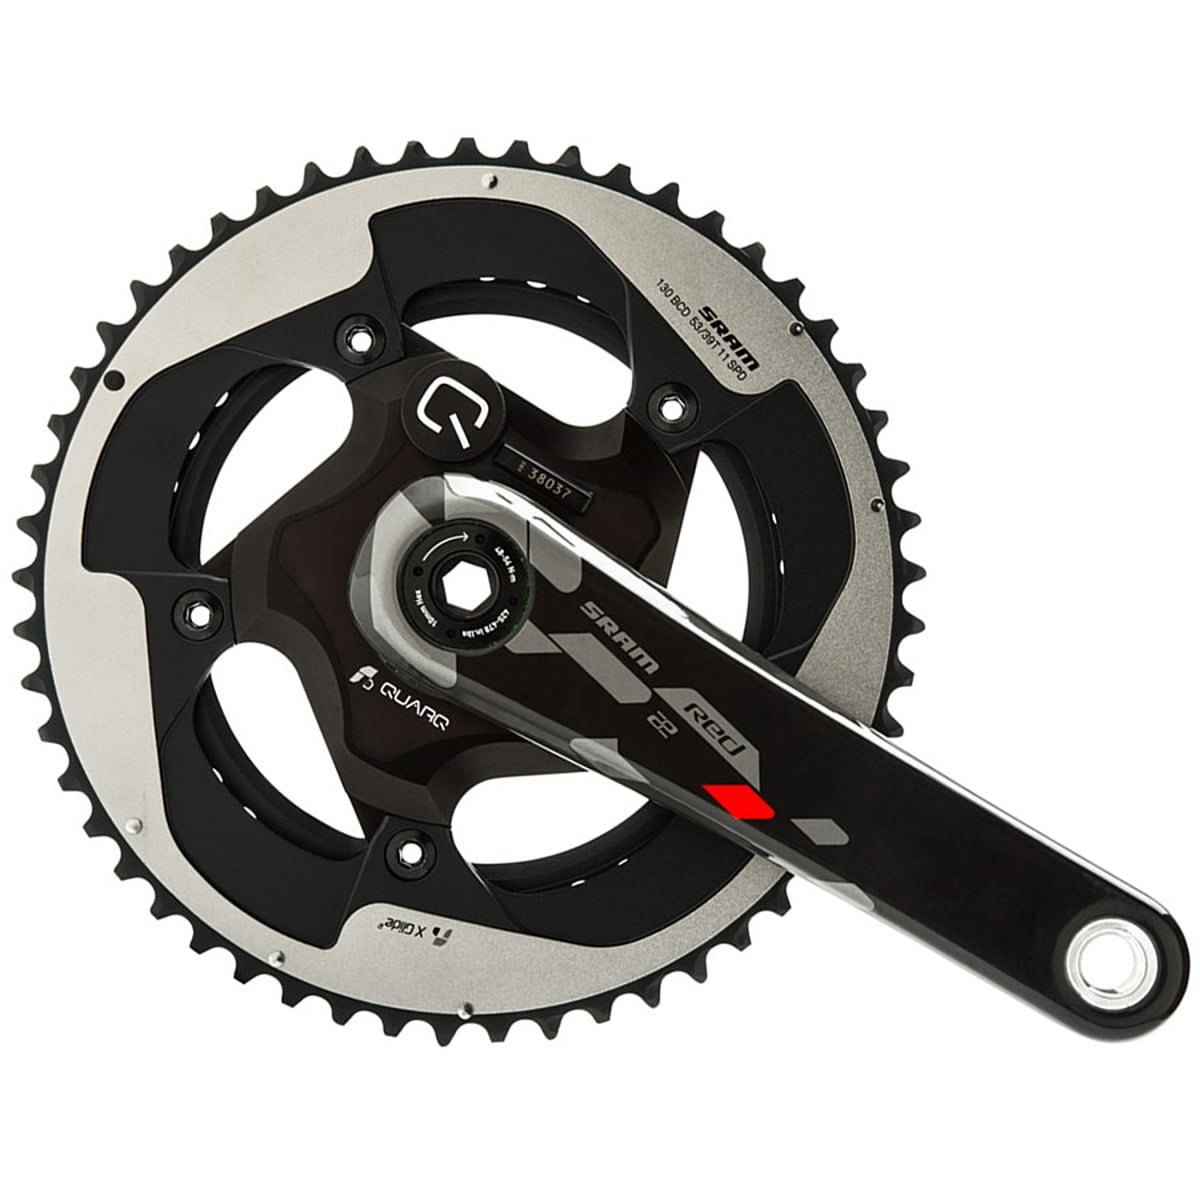 SRAM Red 22 Power Meter - BB30 - Components